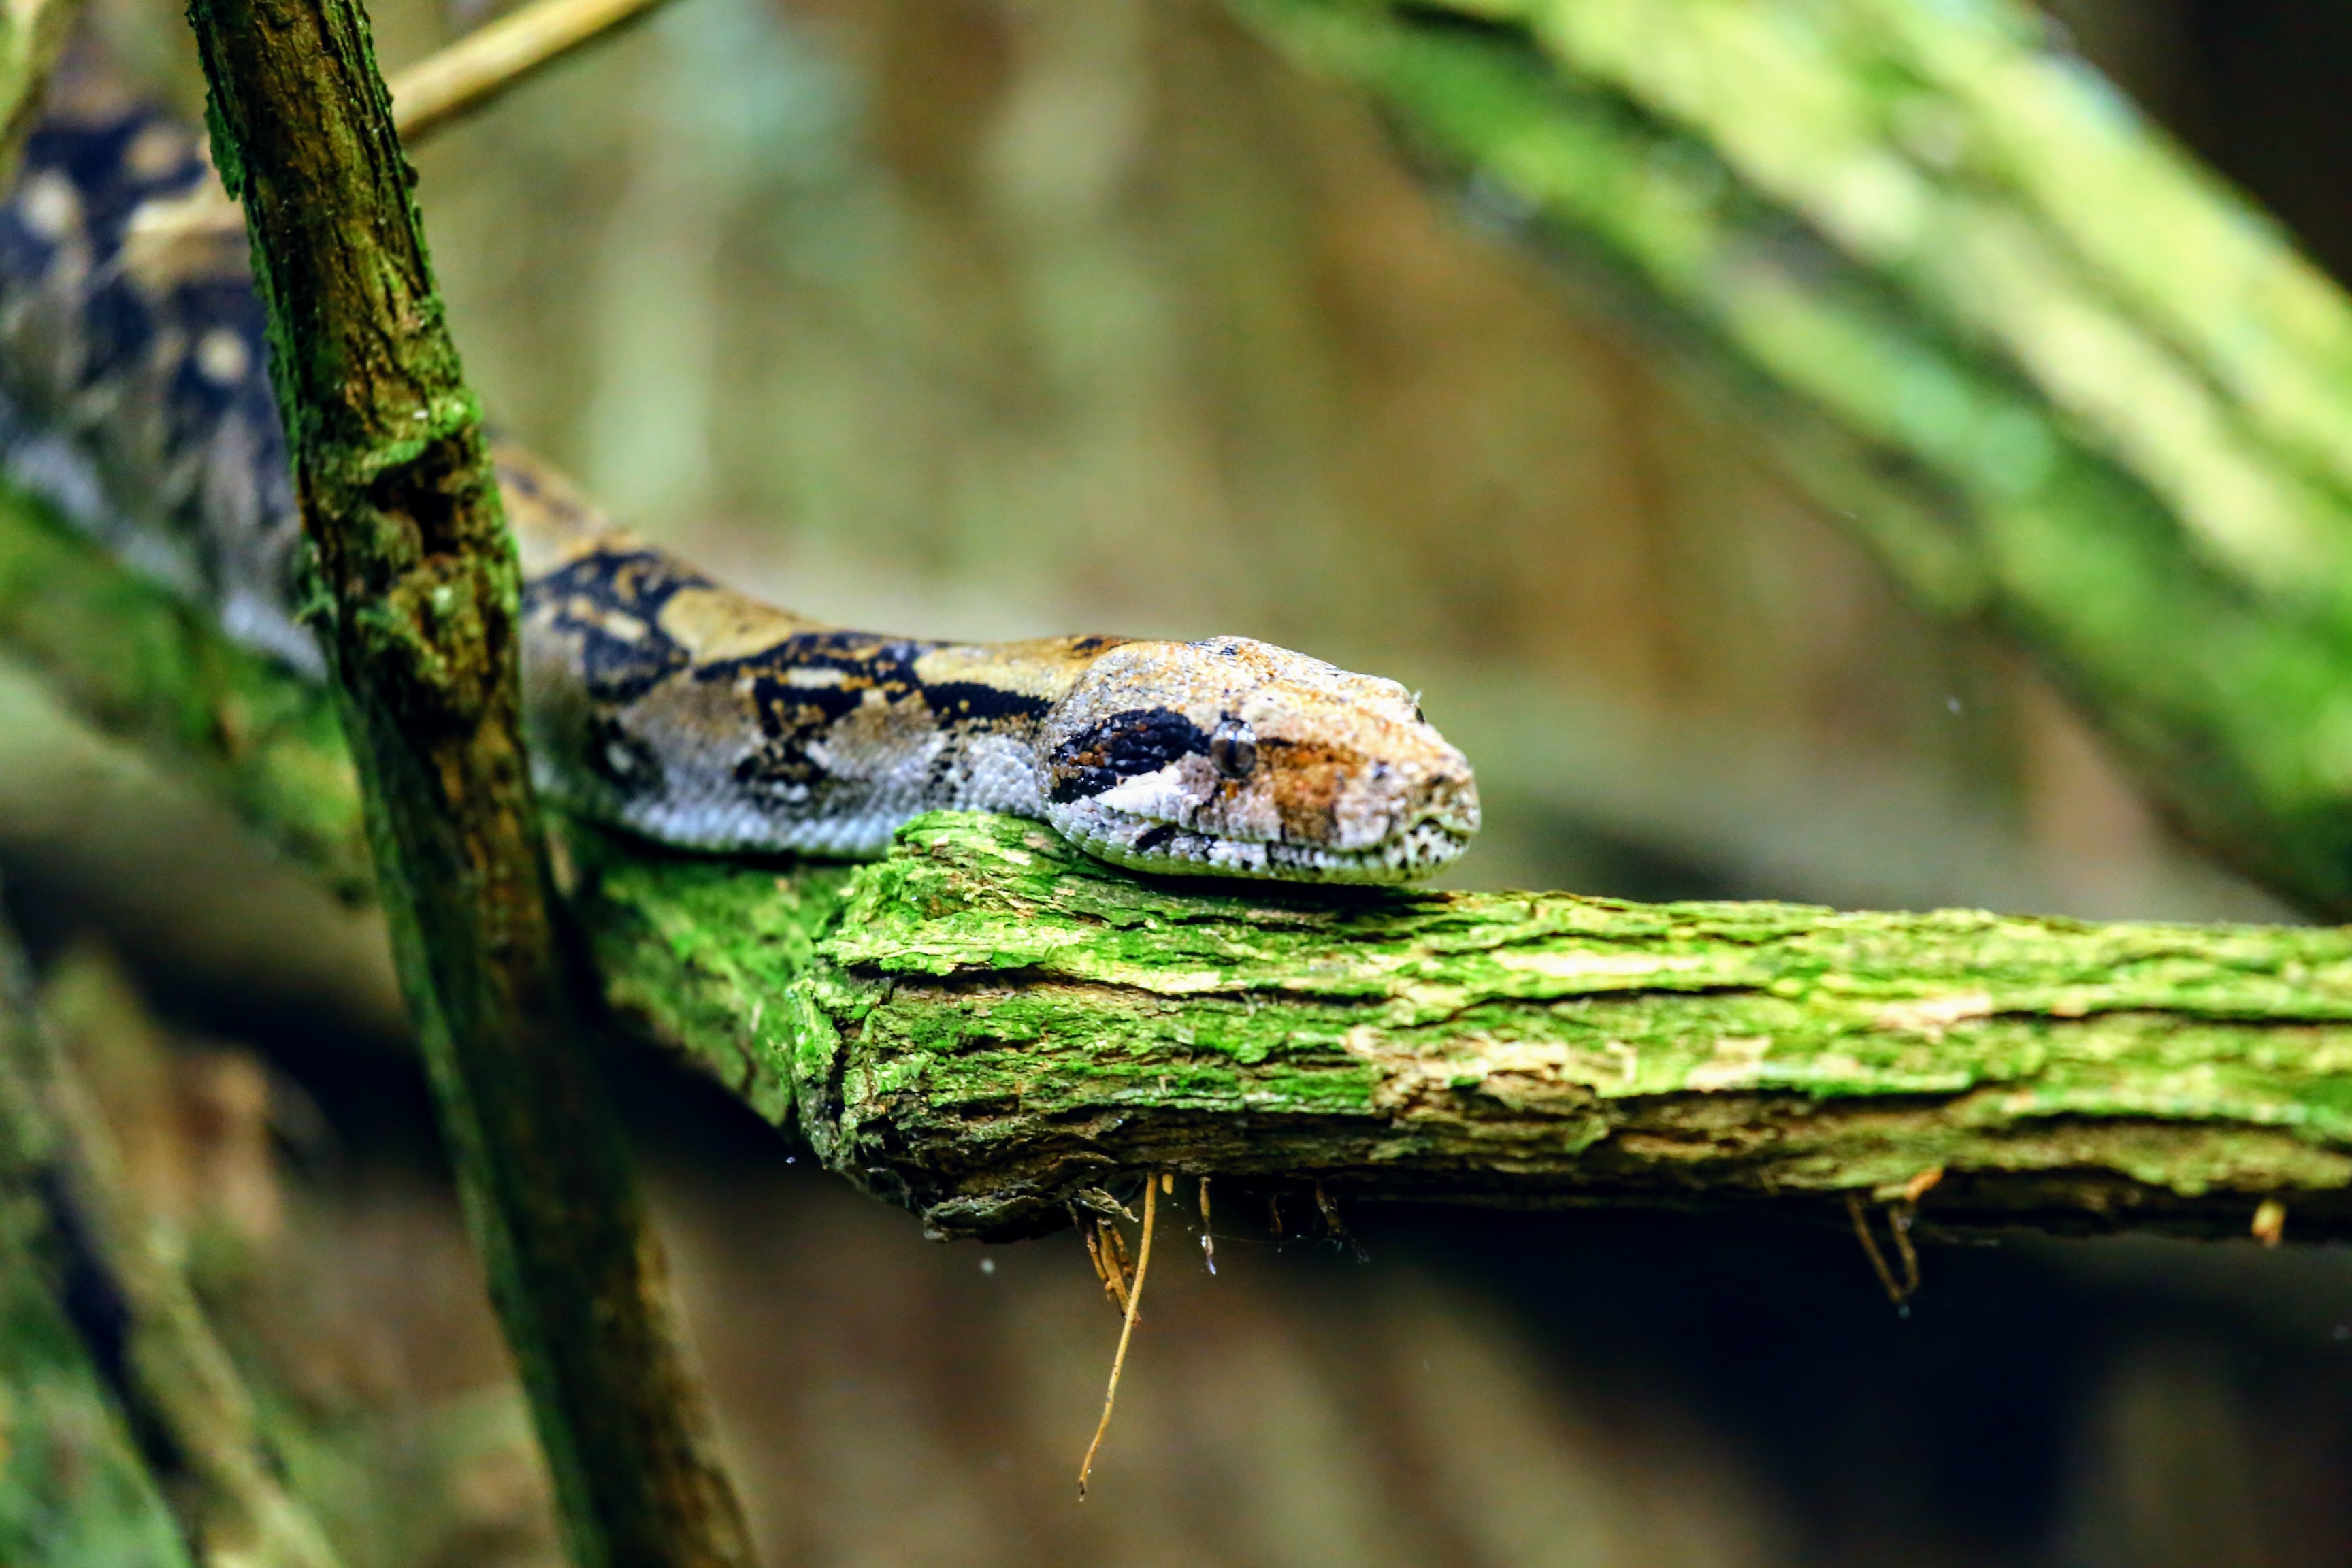 How snakes move in a straight line |